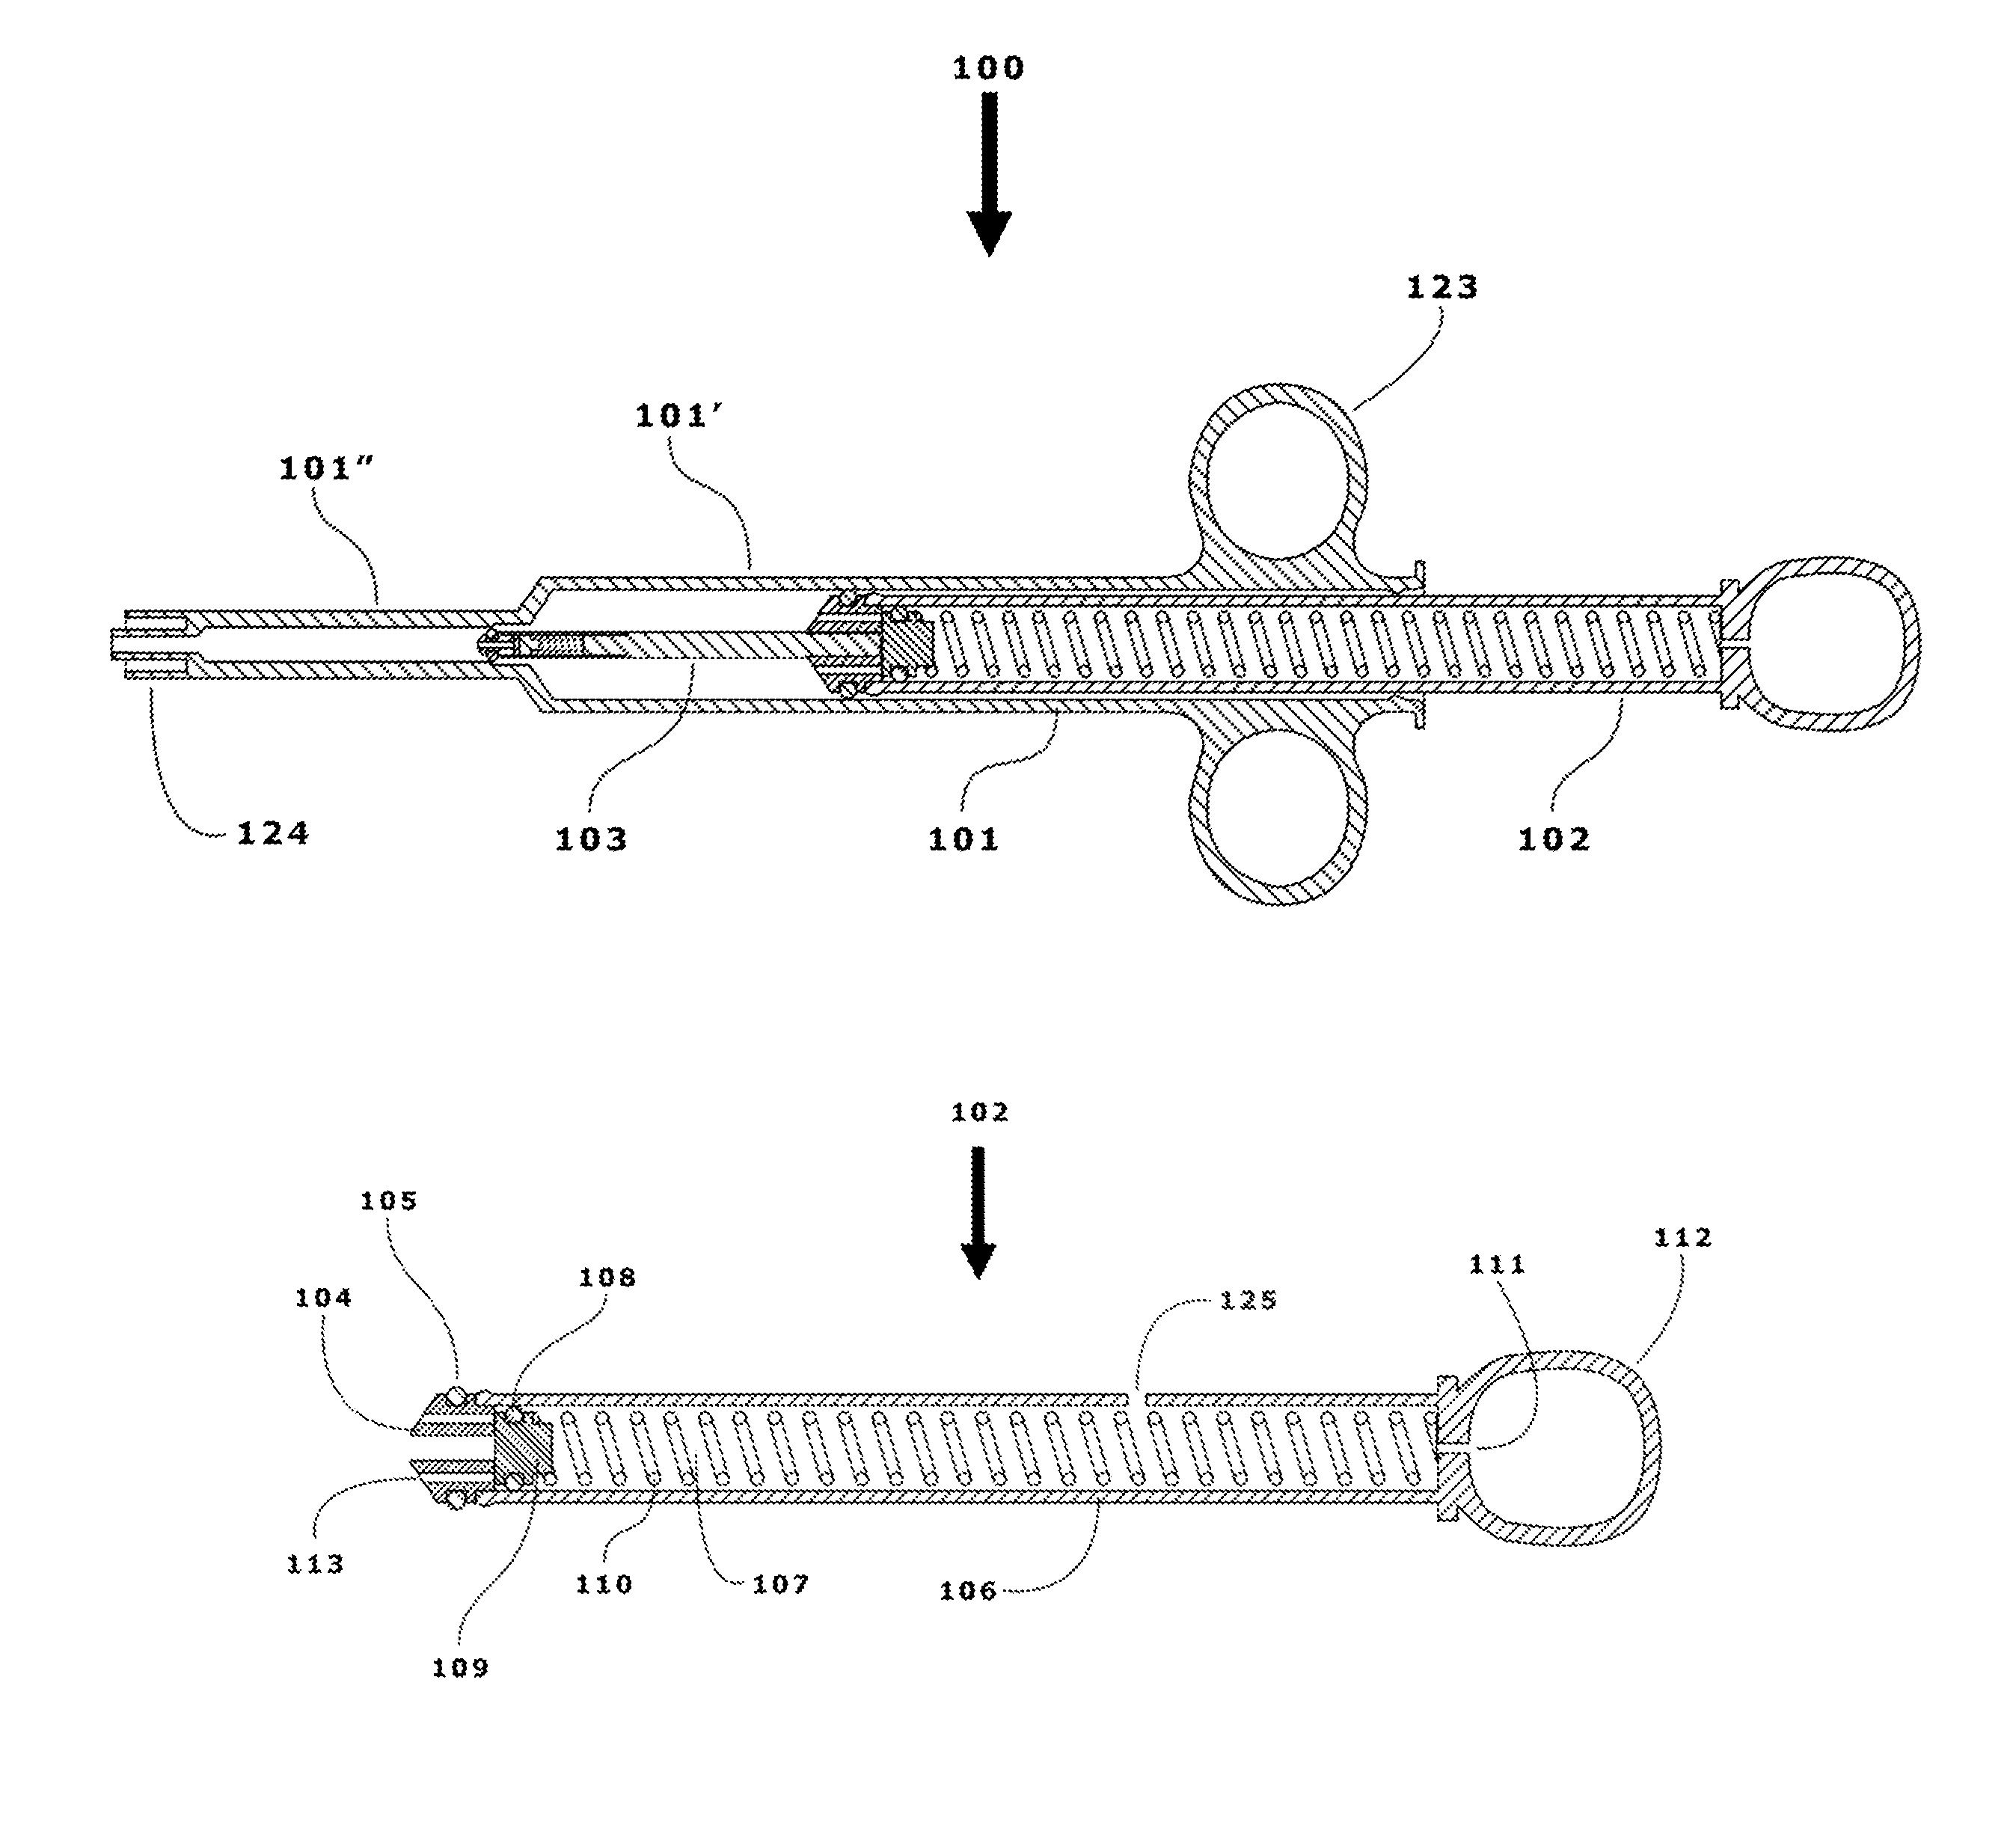 Apparatus and methods for inflating and deflating balloon catheters